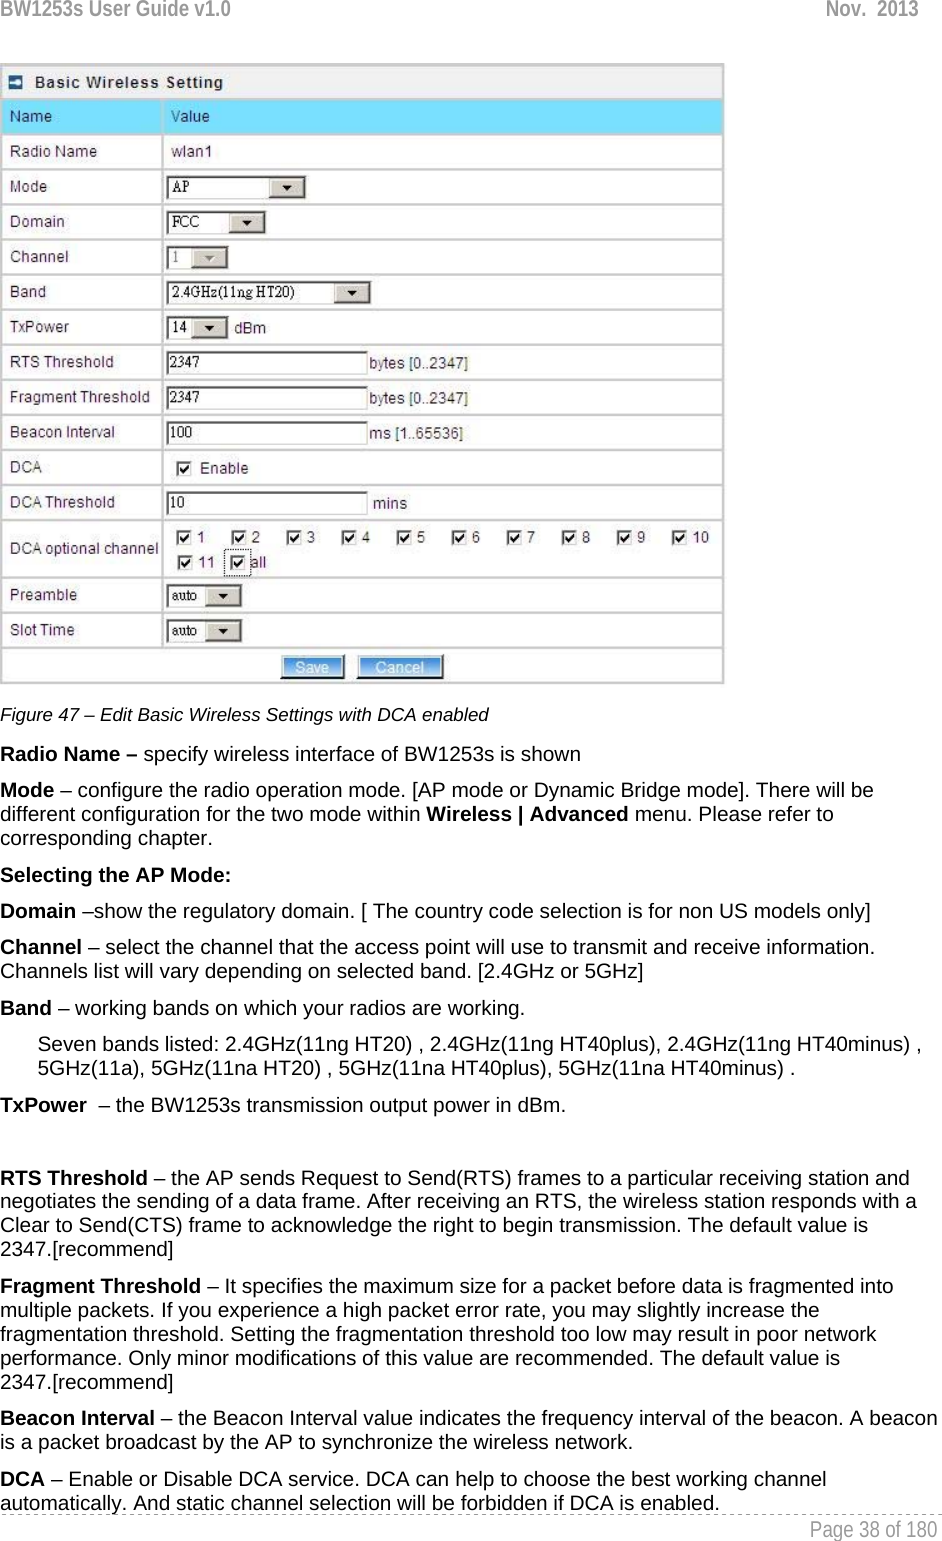 BW1253s User Guide v1.0  Nov.  2013     Page 38 of 180    Figure 47 – Edit Basic Wireless Settings with DCA enabled Radio Name – specify wireless interface of BW1253s is shown Mode – configure the radio operation mode. [AP mode or Dynamic Bridge mode]. There will be different configuration for the two mode within Wireless | Advanced menu. Please refer to corresponding chapter. Selecting the AP Mode: Domain –show the regulatory domain. [ The country code selection is for non US models only] Channel – select the channel that the access point will use to transmit and receive information. Channels list will vary depending on selected band. [2.4GHz or 5GHz] Band – working bands on which your radios are working.  Seven bands listed: 2.4GHz(11ng HT20) , 2.4GHz(11ng HT40plus), 2.4GHz(11ng HT40minus) , 5GHz(11a), 5GHz(11na HT20) , 5GHz(11na HT40plus), 5GHz(11na HT40minus) . TxPower  – the BW1253s transmission output power in dBm.   RTS Threshold – the AP sends Request to Send(RTS) frames to a particular receiving station and negotiates the sending of a data frame. After receiving an RTS, the wireless station responds with a Clear to Send(CTS) frame to acknowledge the right to begin transmission. The default value is 2347.[recommend] Fragment Threshold – It specifies the maximum size for a packet before data is fragmented into multiple packets. If you experience a high packet error rate, you may slightly increase the fragmentation threshold. Setting the fragmentation threshold too low may result in poor network performance. Only minor modifications of this value are recommended. The default value is 2347.[recommend] Beacon Interval – the Beacon Interval value indicates the frequency interval of the beacon. A beacon is a packet broadcast by the AP to synchronize the wireless network. DCA – Enable or Disable DCA service. DCA can help to choose the best working channel automatically. And static channel selection will be forbidden if DCA is enabled. 